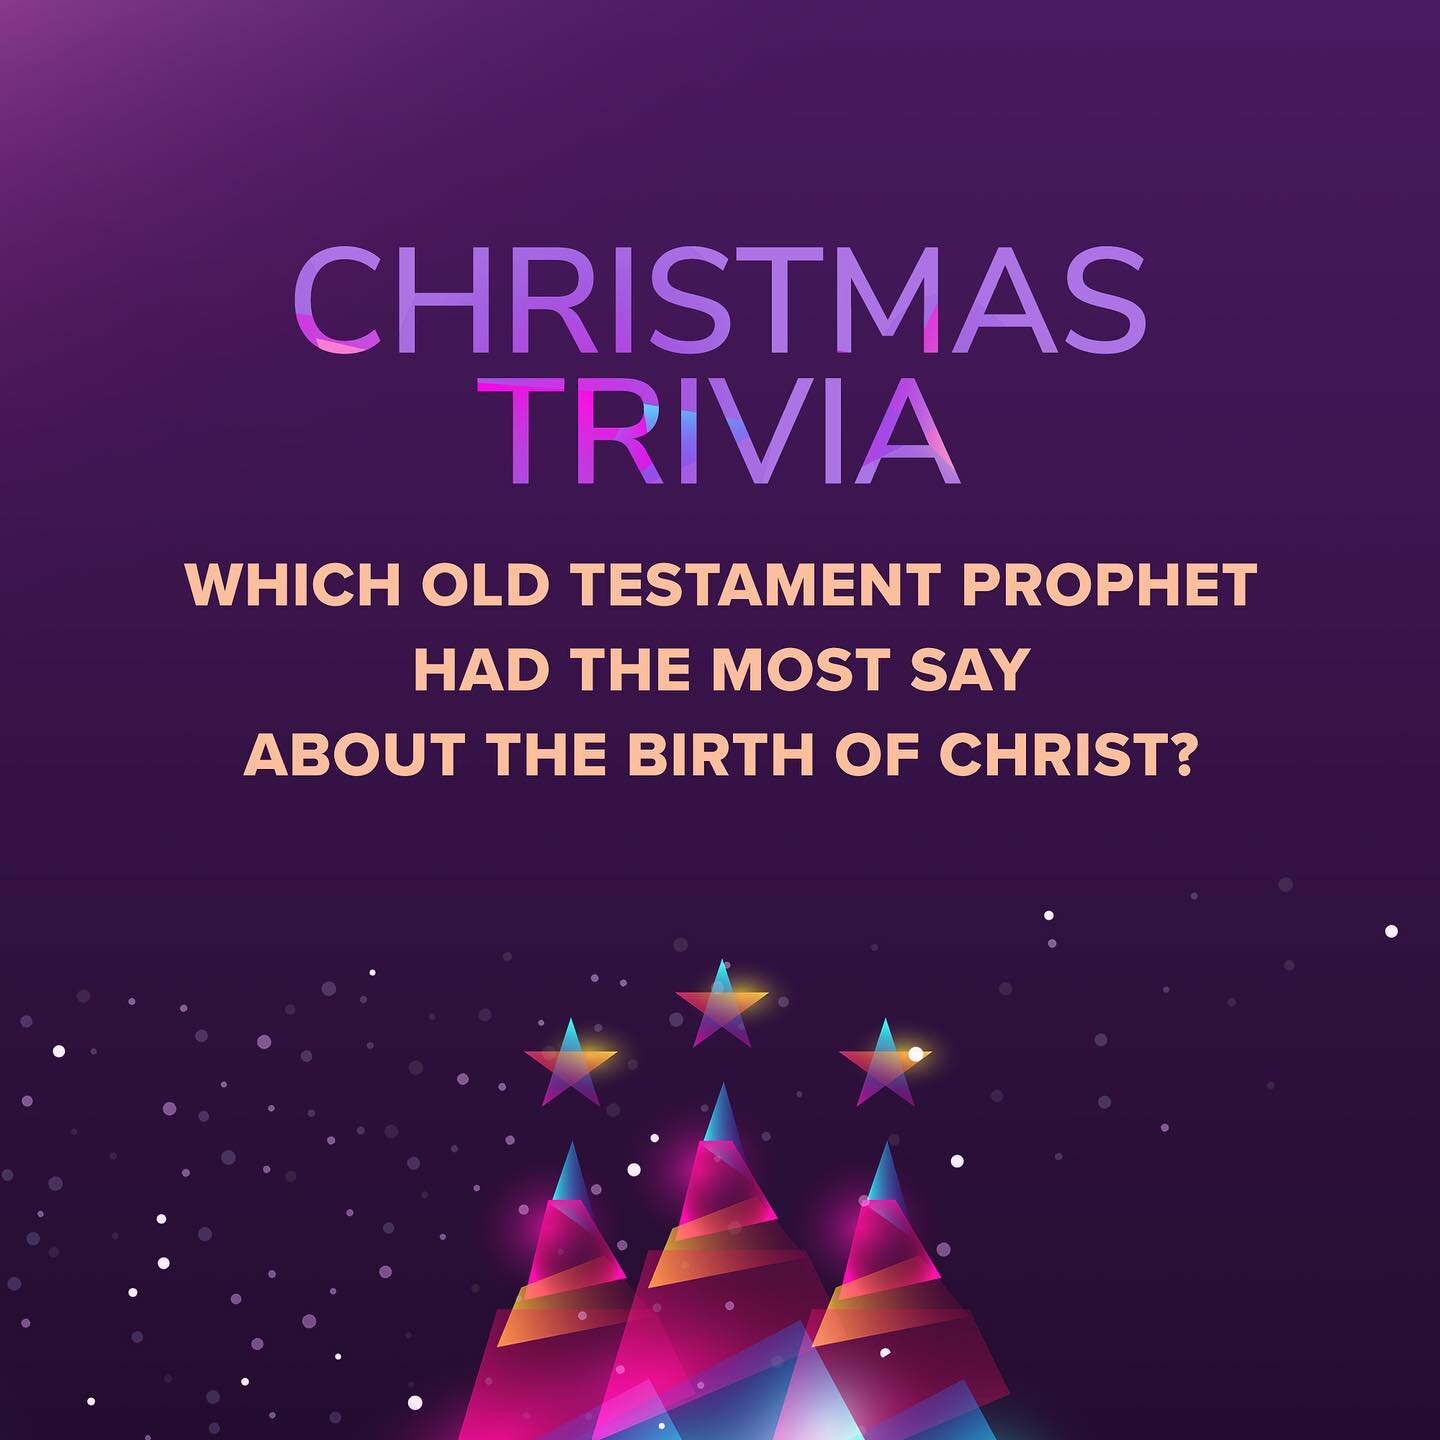 Join us at our Downtown location to find the answer!!
#christmastrivia #boiseteens #downtownboise #downtownboiseyouth